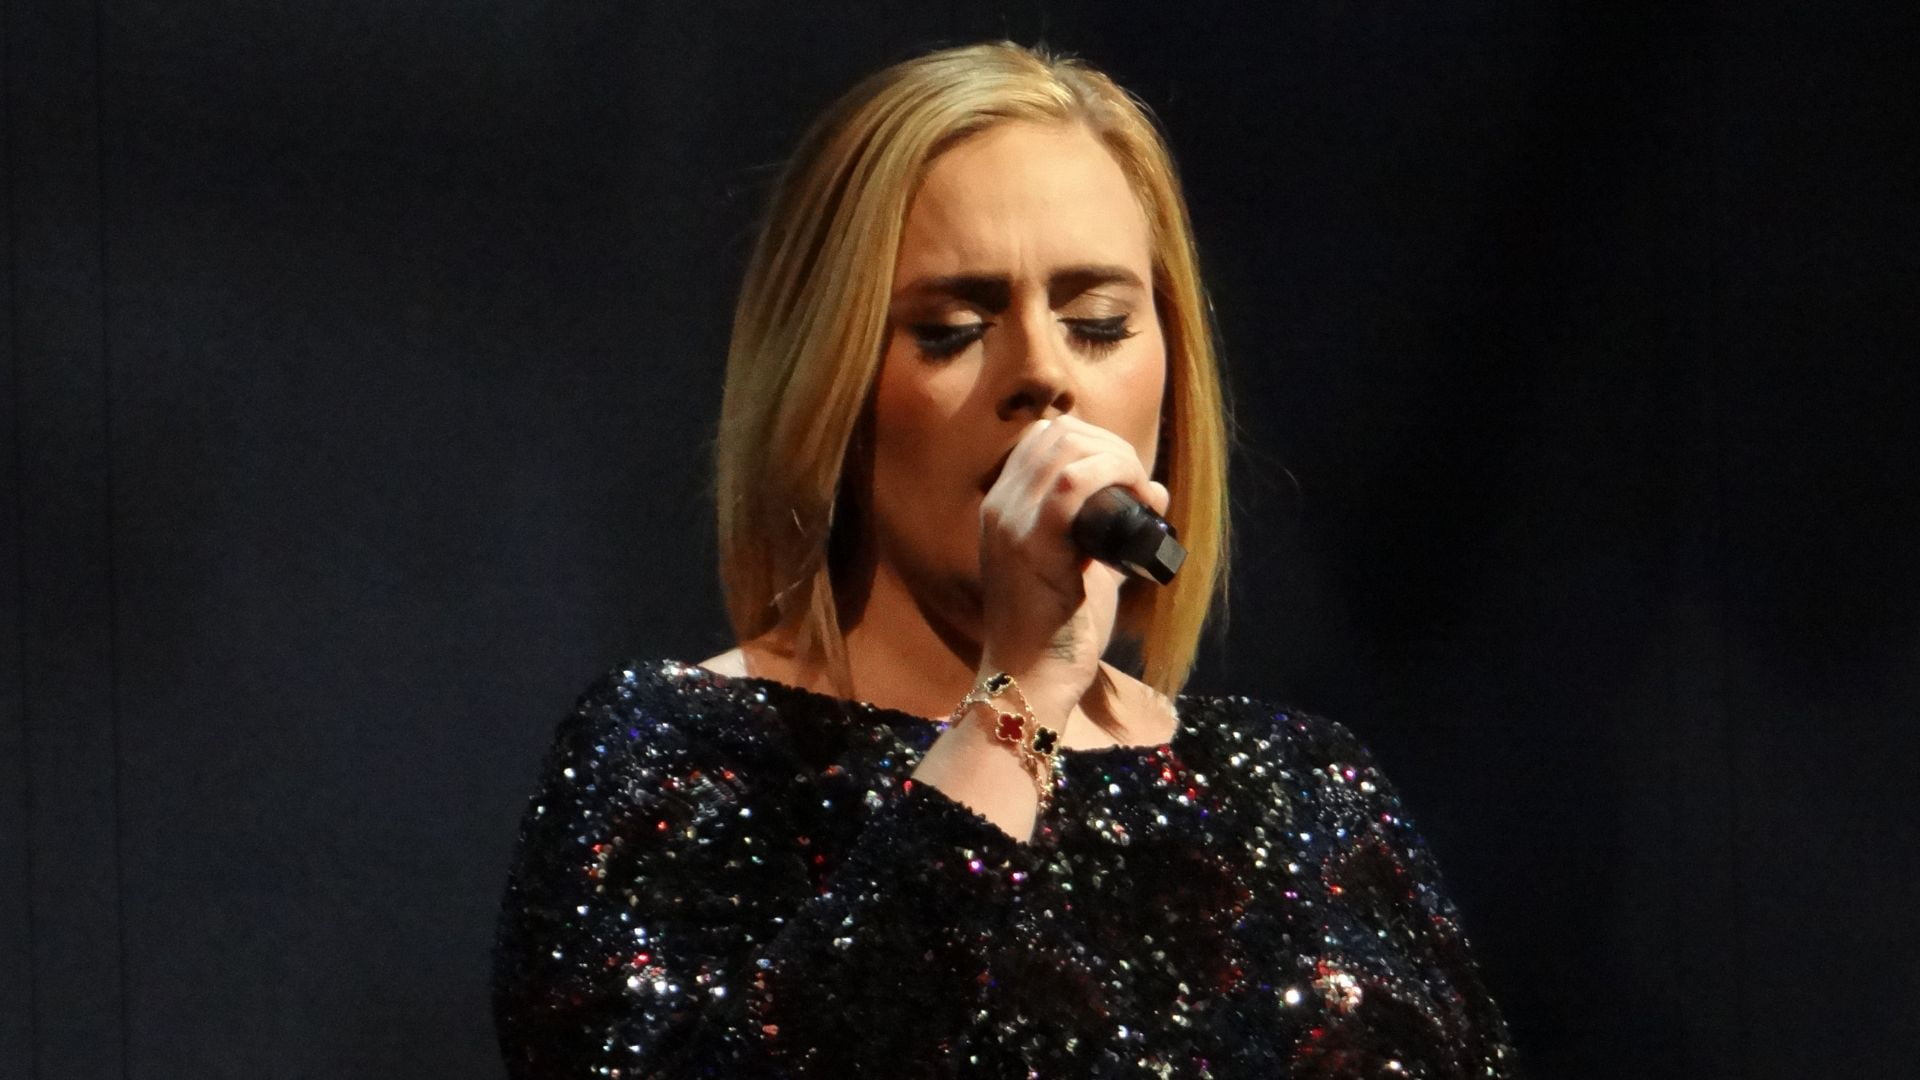 Adele drops hints about upcoming tour plans at Las Vegas residency